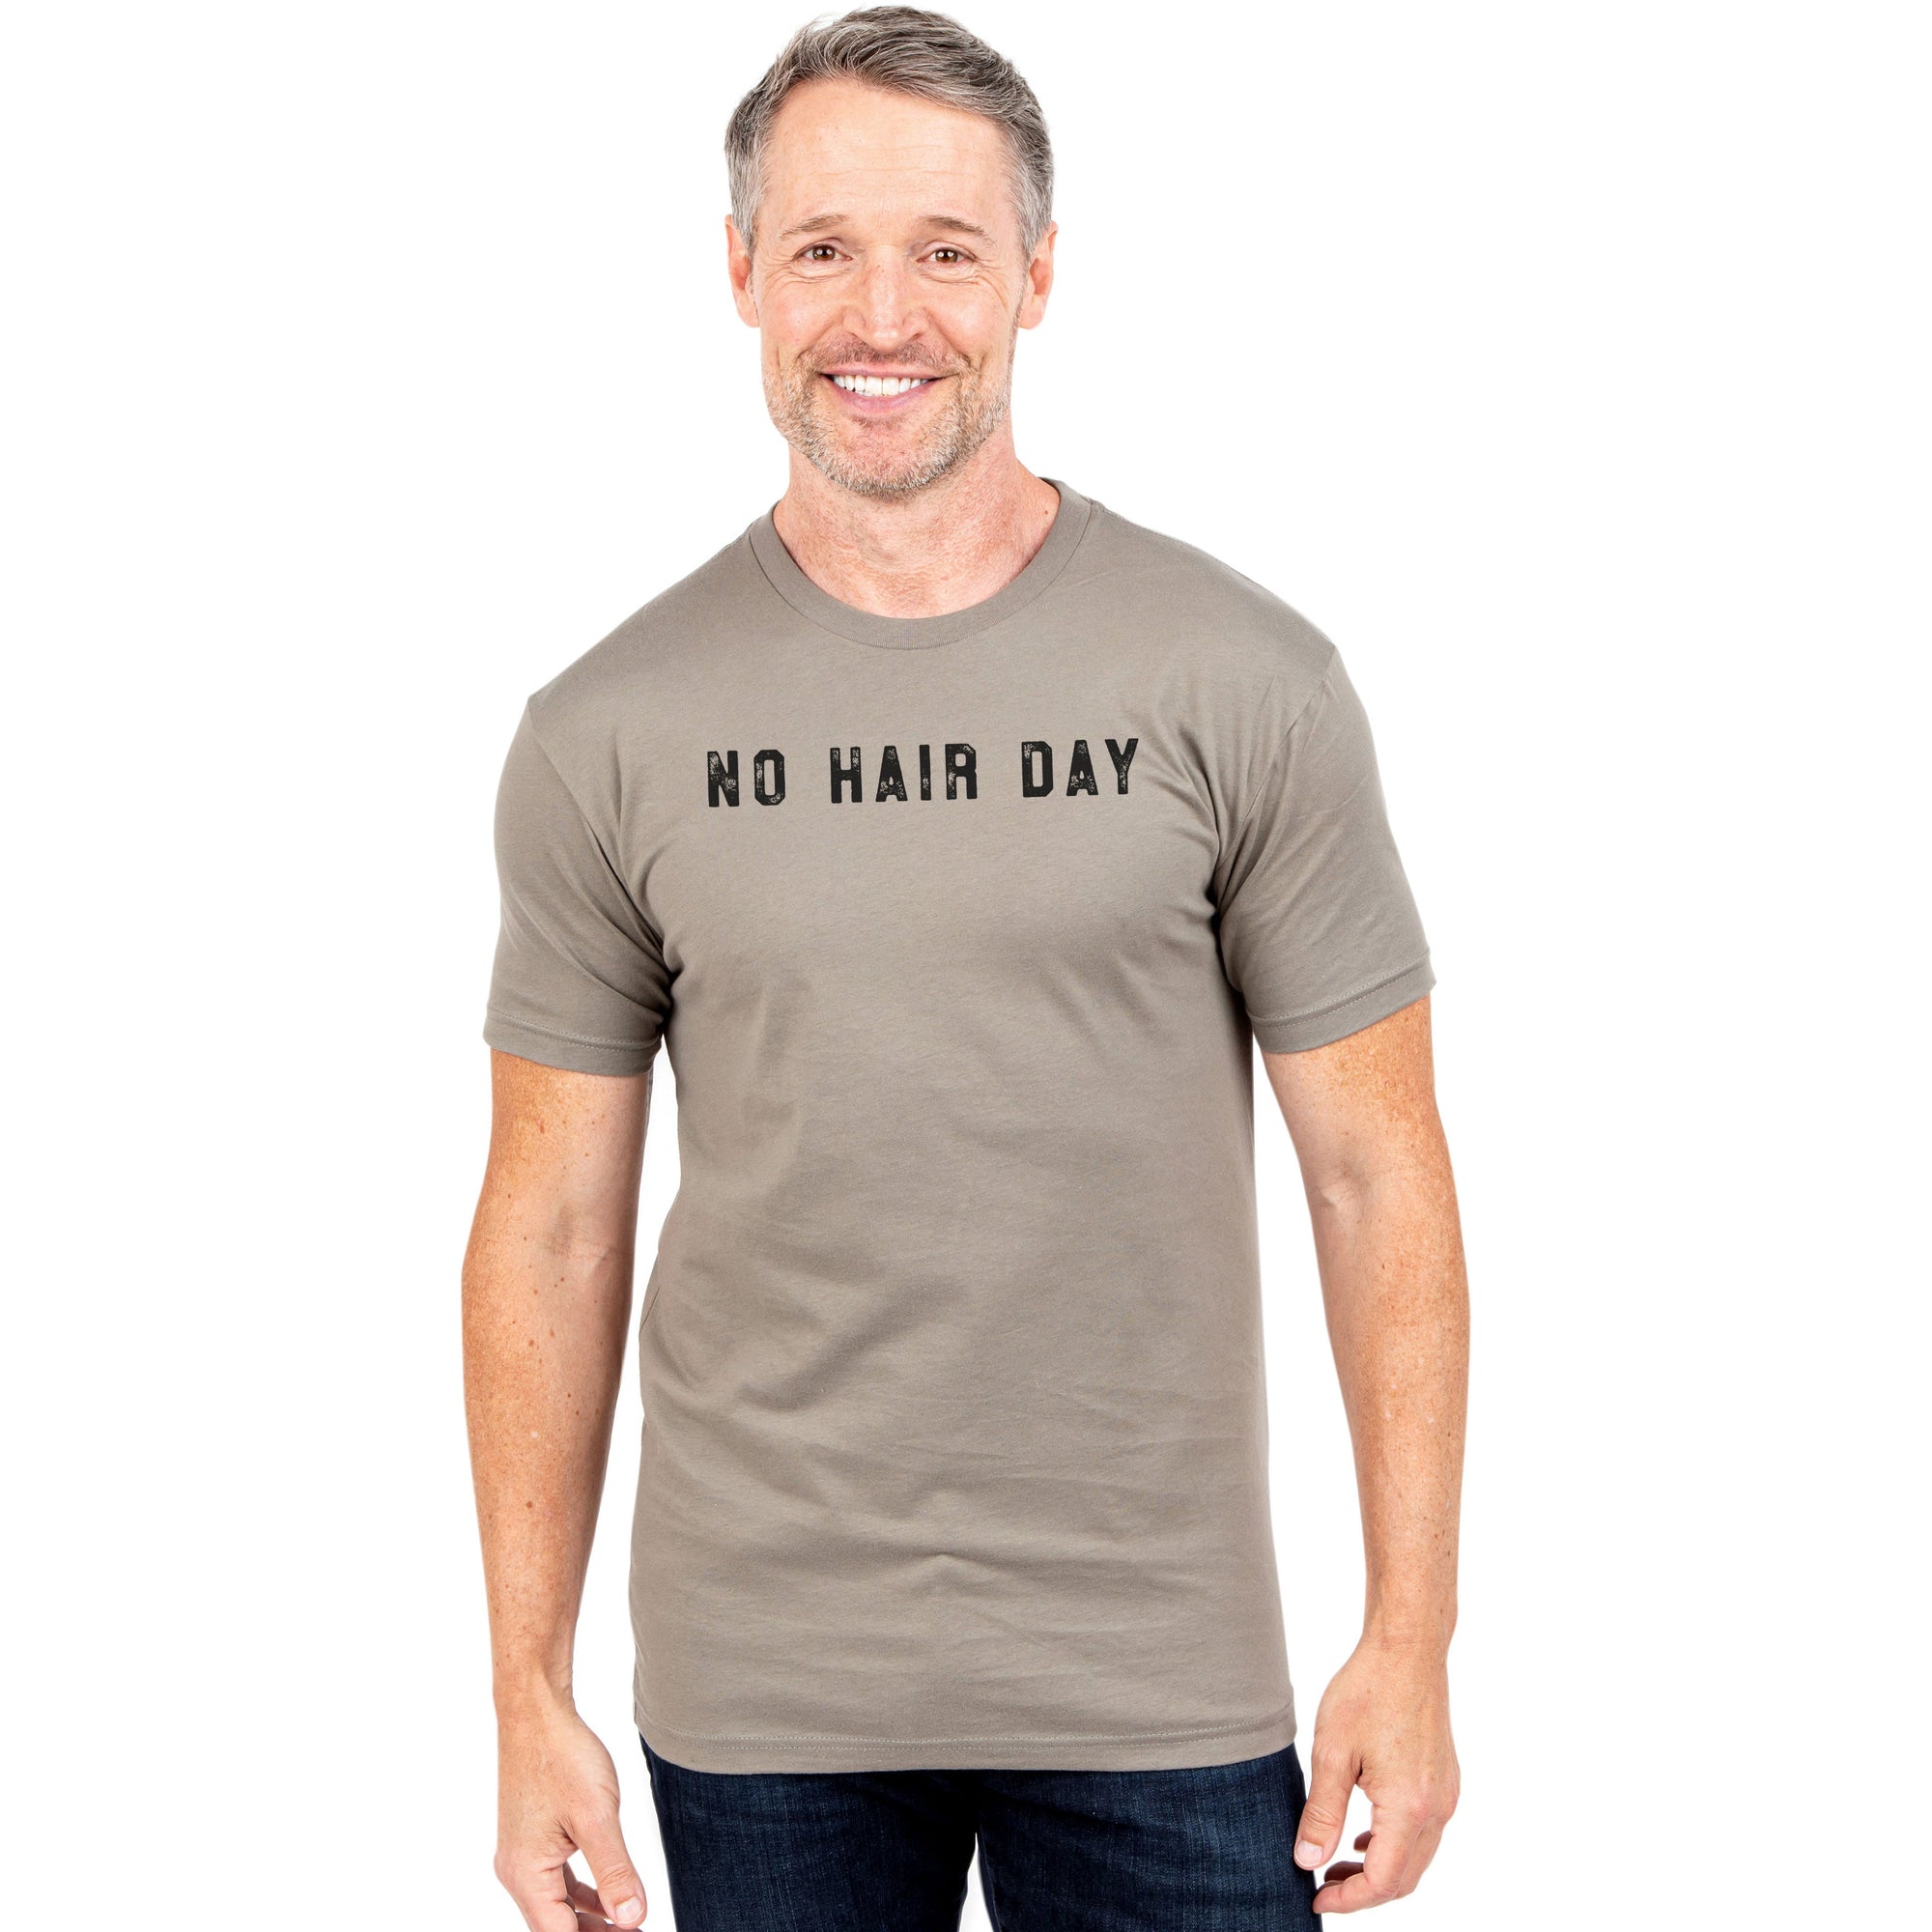 No Hair Day Military Grey Printed Graphic Men's Crew T-Shirt Tee Model